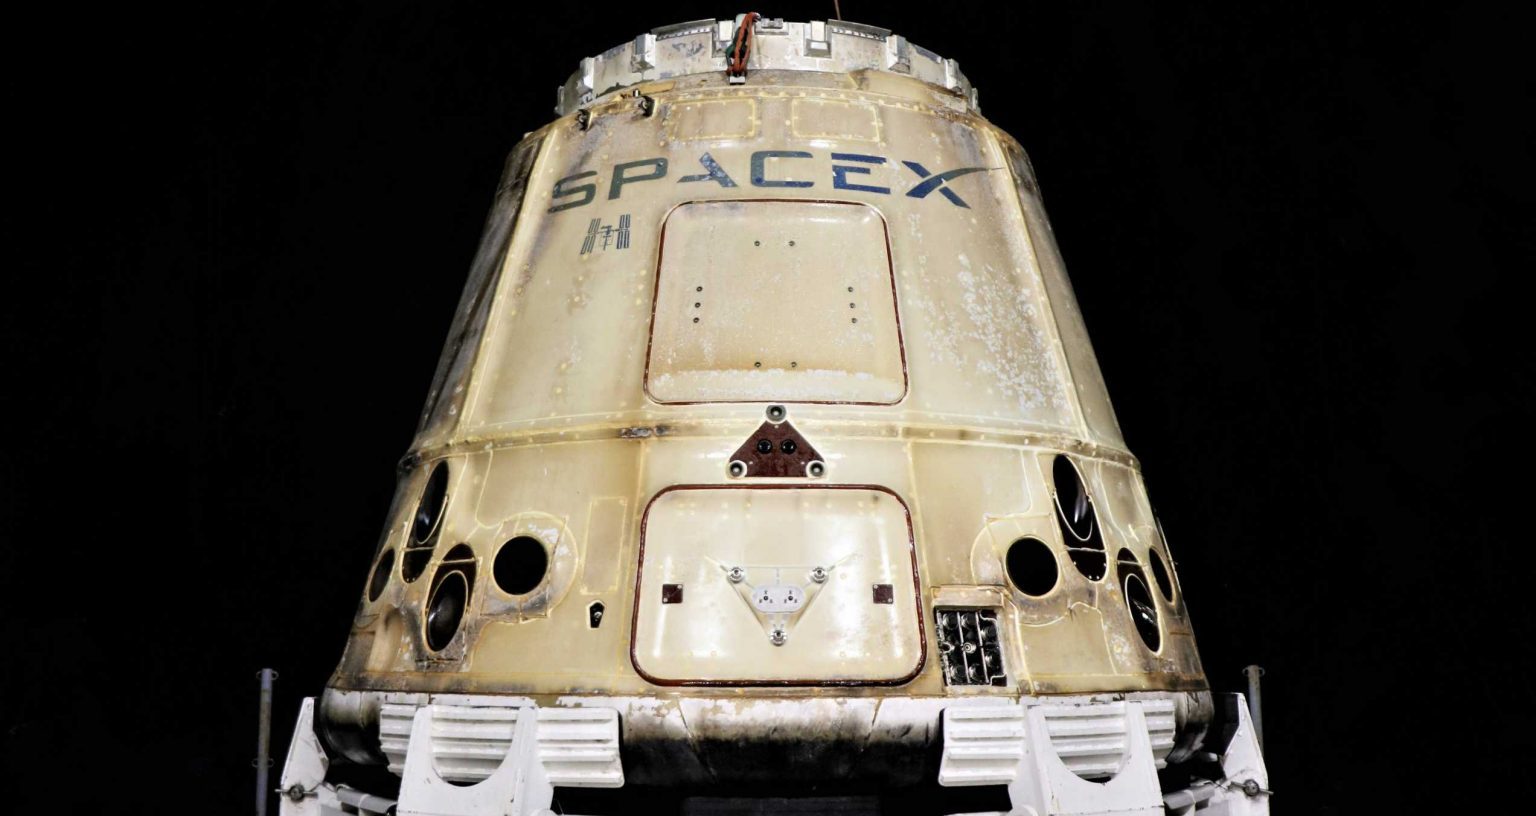 cargo-dragon-c112-crs-16-recovery-011319-spacex-wide-1-c-1536x816